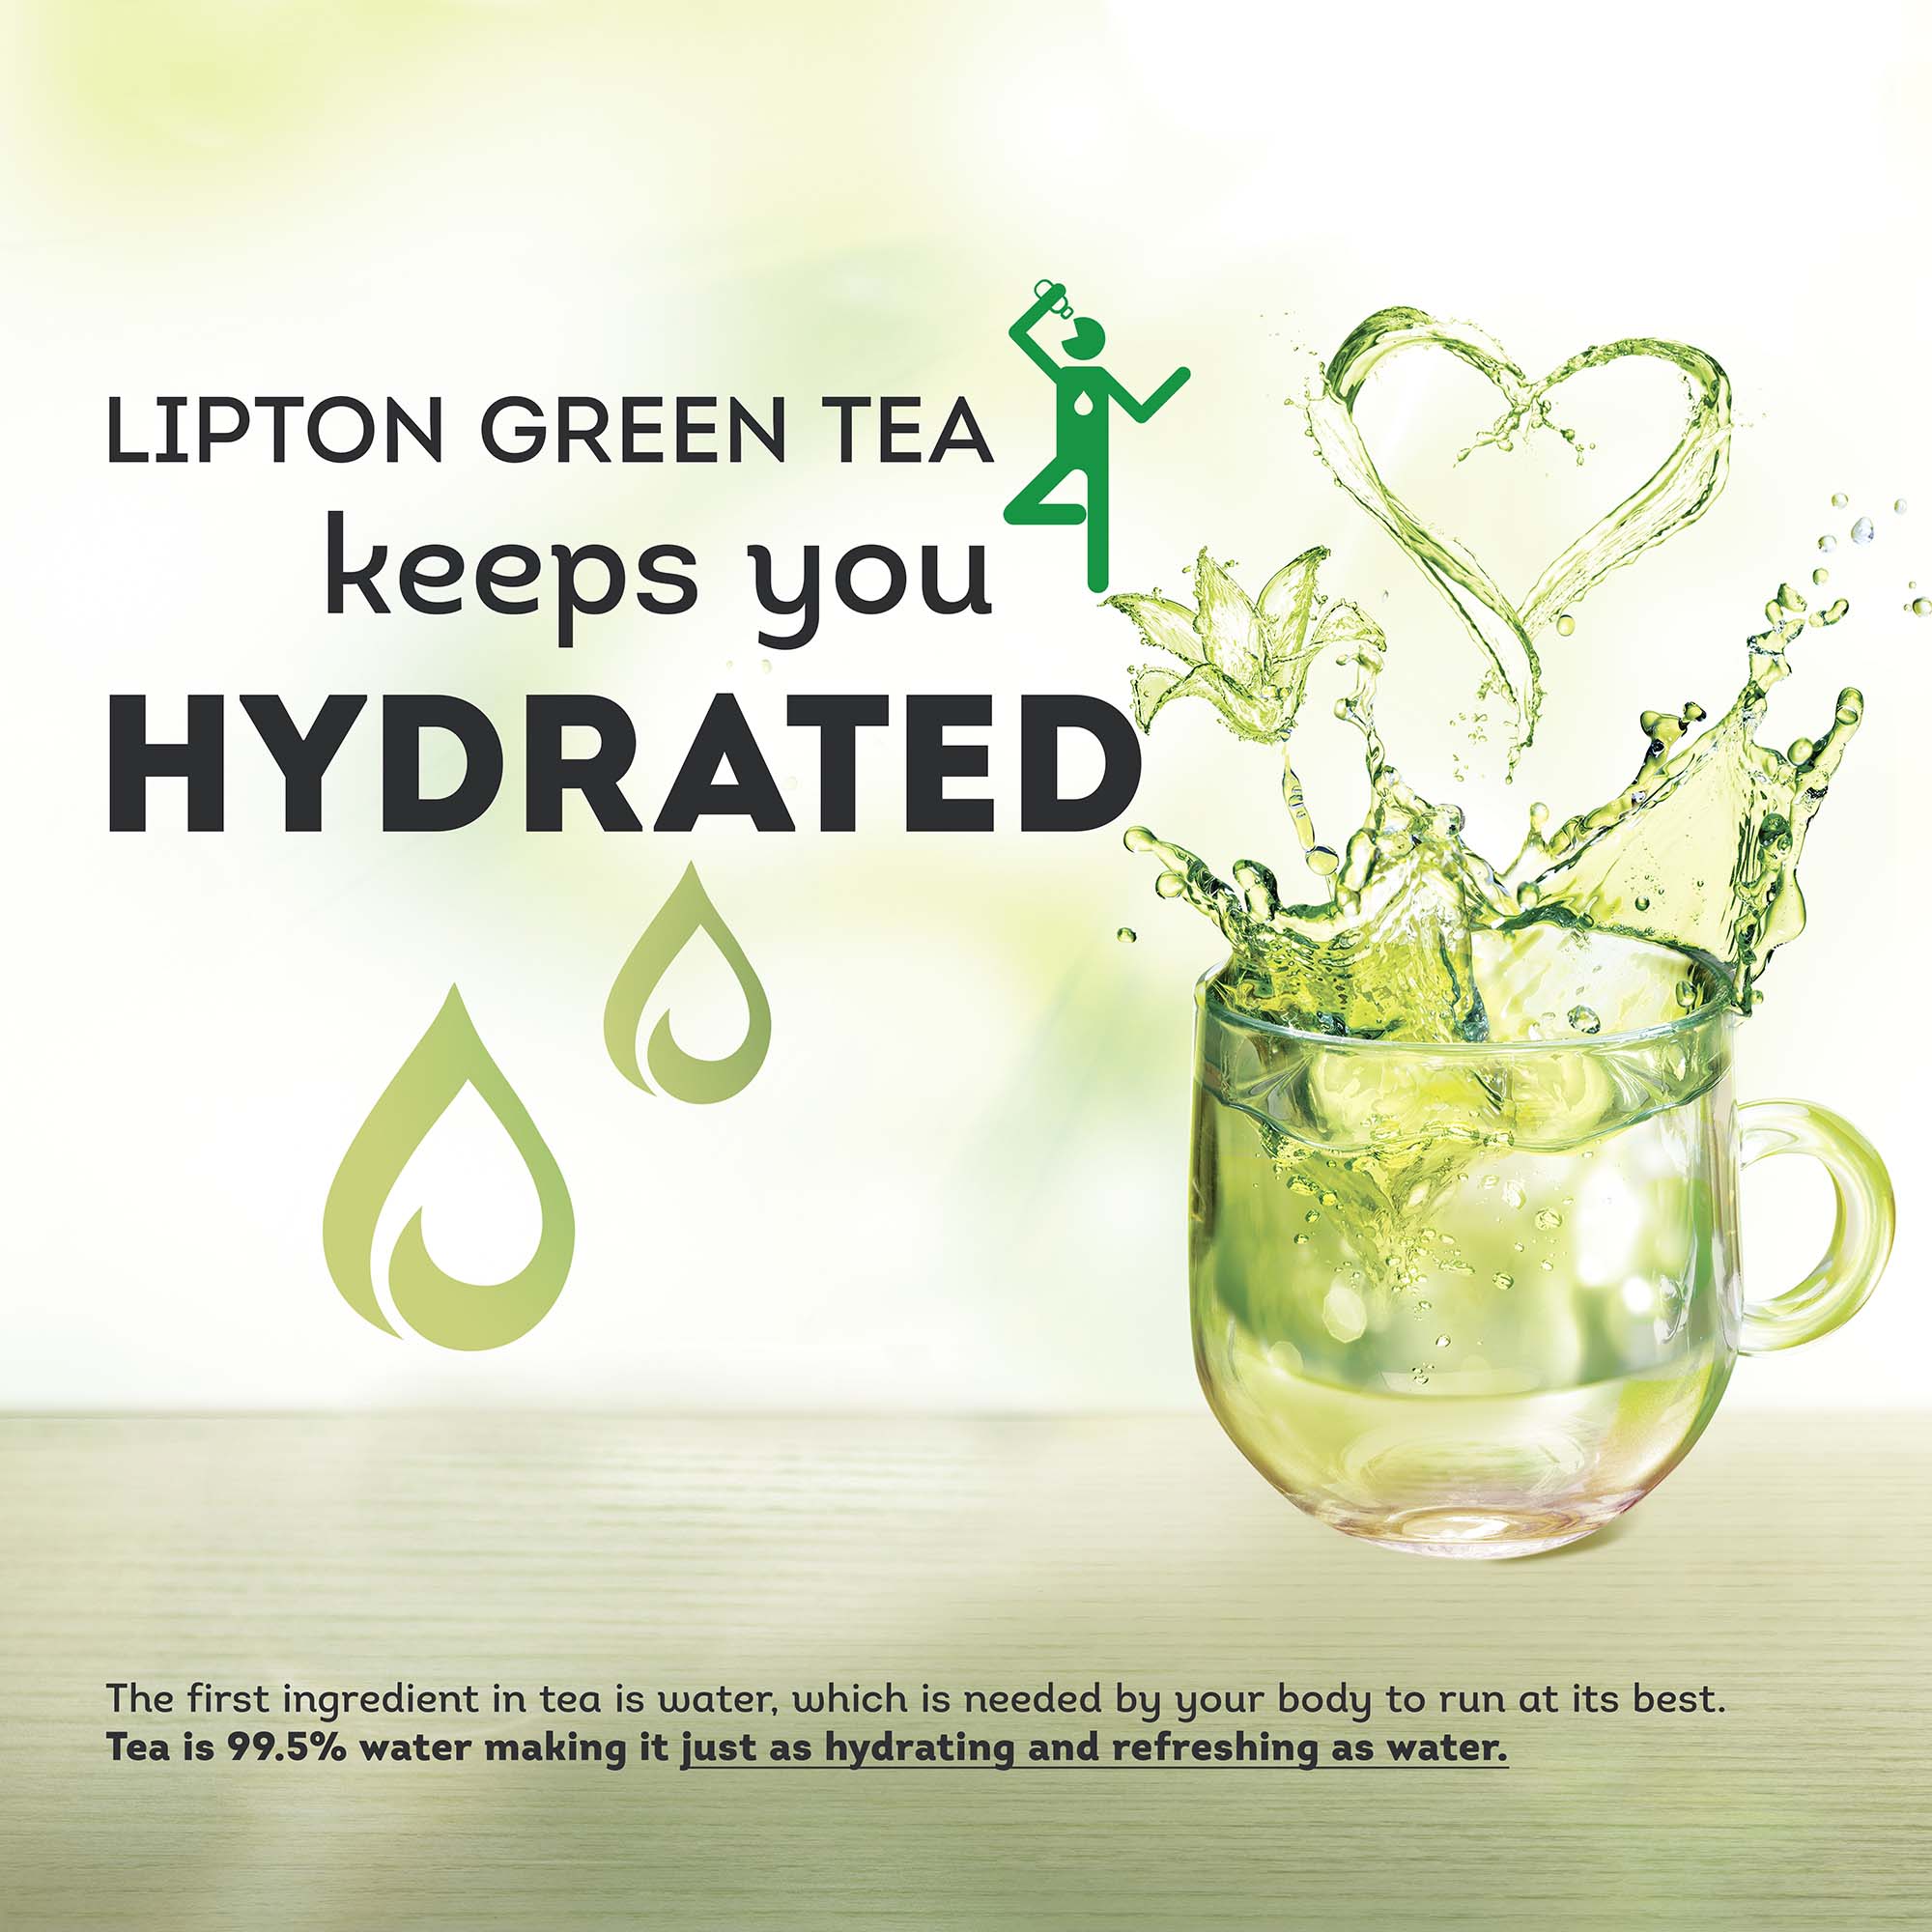 Lipton Green Tea Bags Orange Passionfruit Jasmine Flavored with Other Natural Flavors Can Help Support a Healthy Heart 1.13 oz 20 Count - image 3 of 9